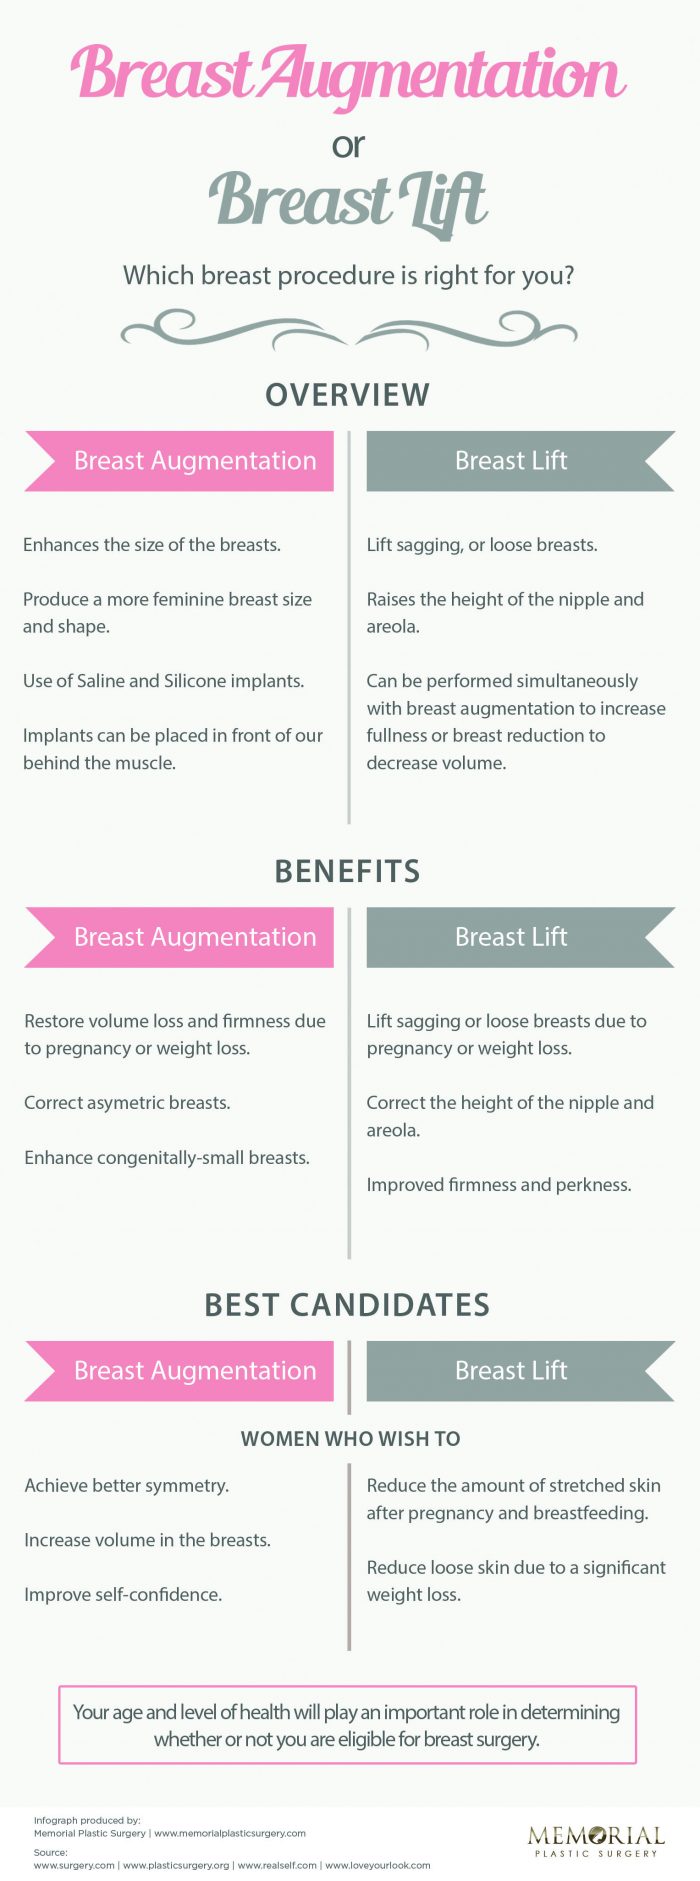 Breast Augmentation: Can You Get Away Without a Breast Lift Procedure?